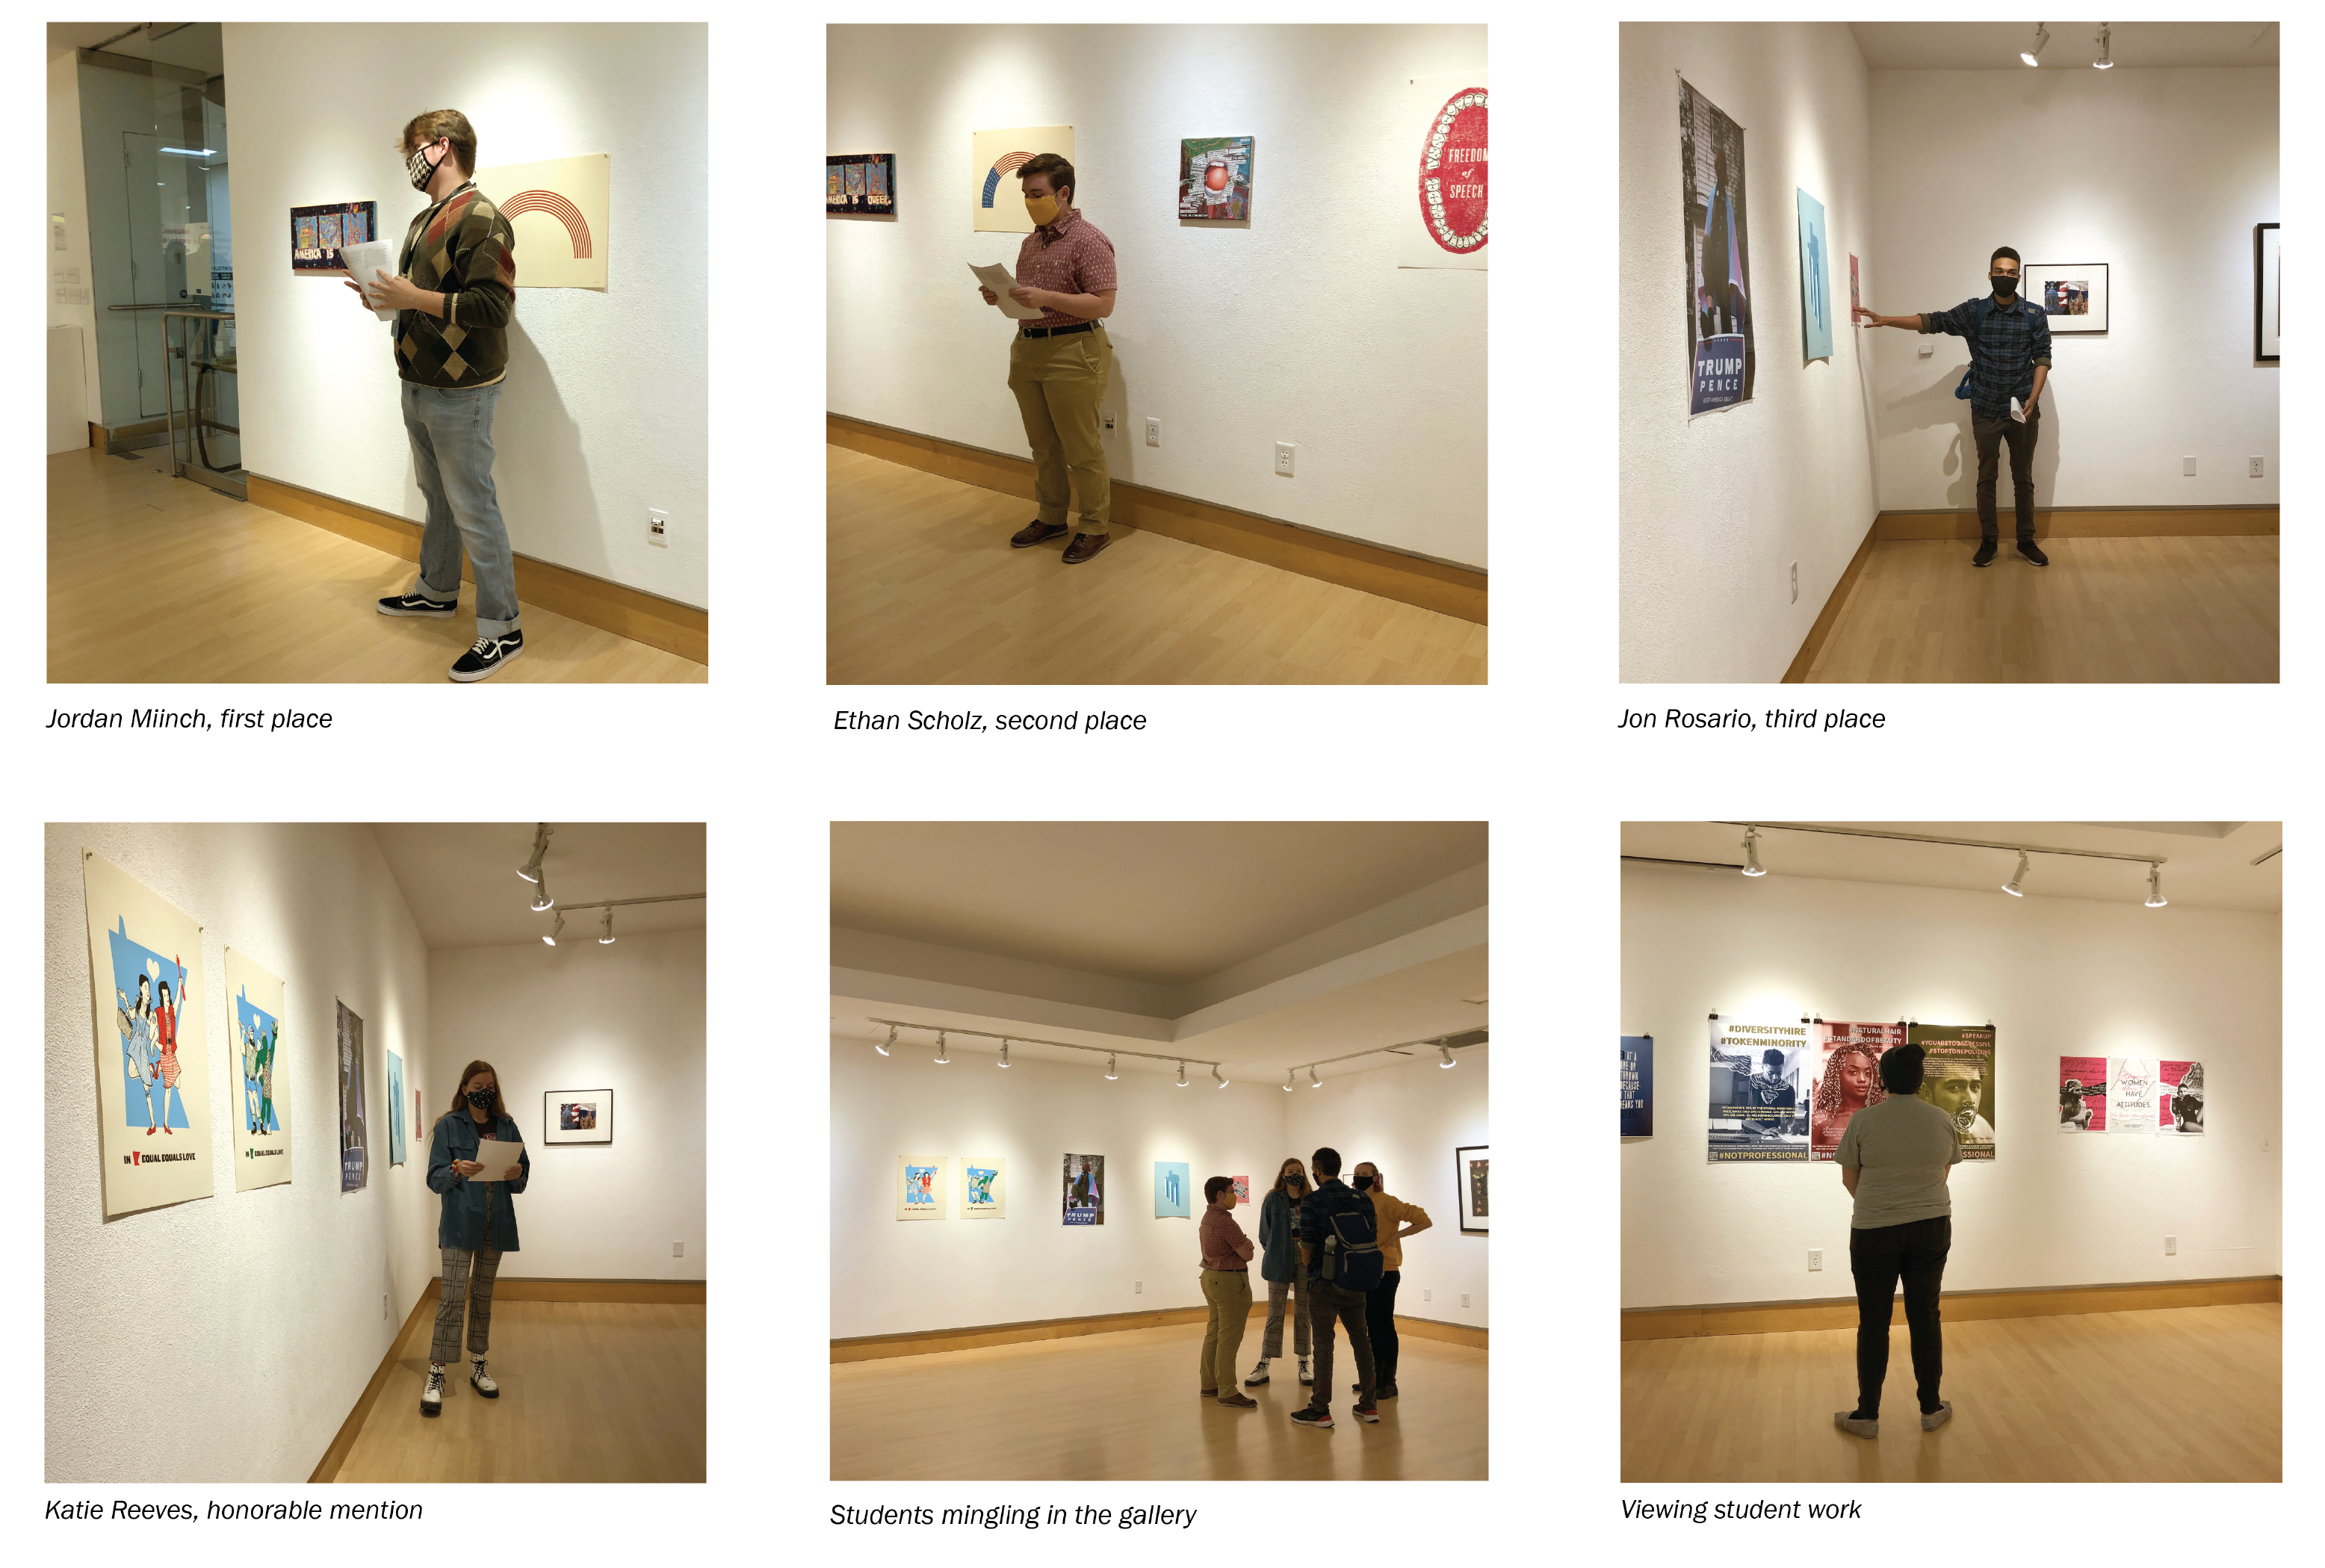 Photos of students in gallery